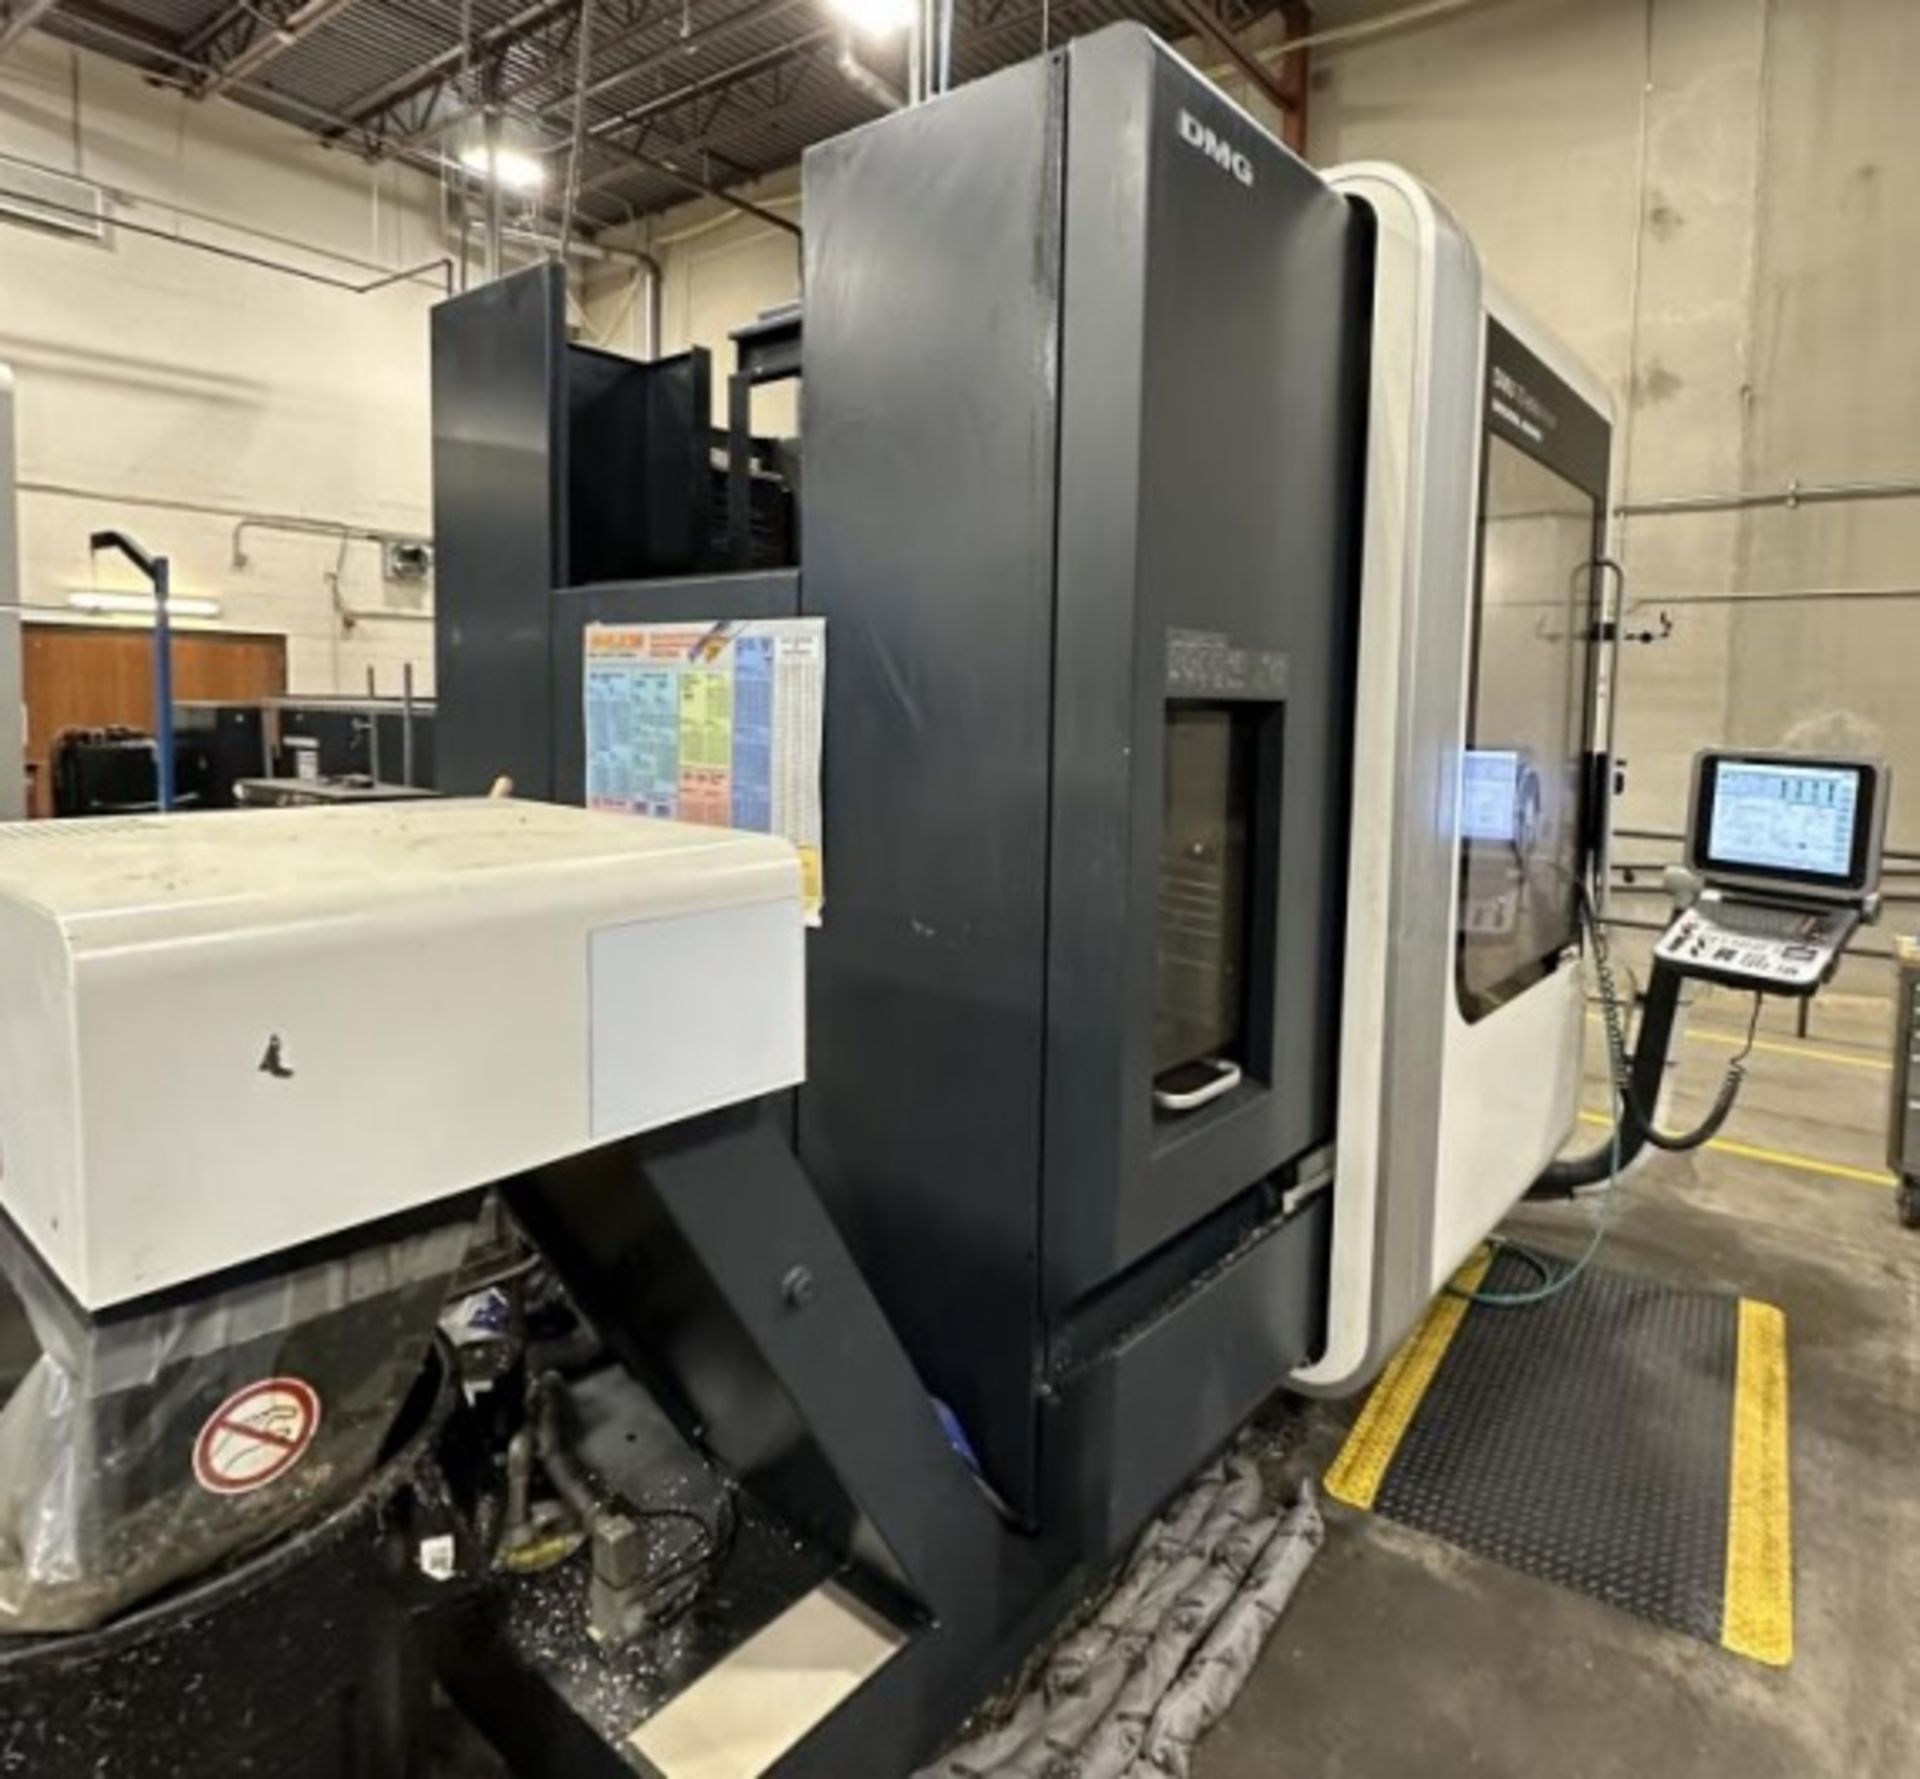 DECKL MAHO DMU 70 EVOLUTION VERTICAL MACHINING CENTER, S/N 15455717194, NEW 2008 - Image 3 of 5